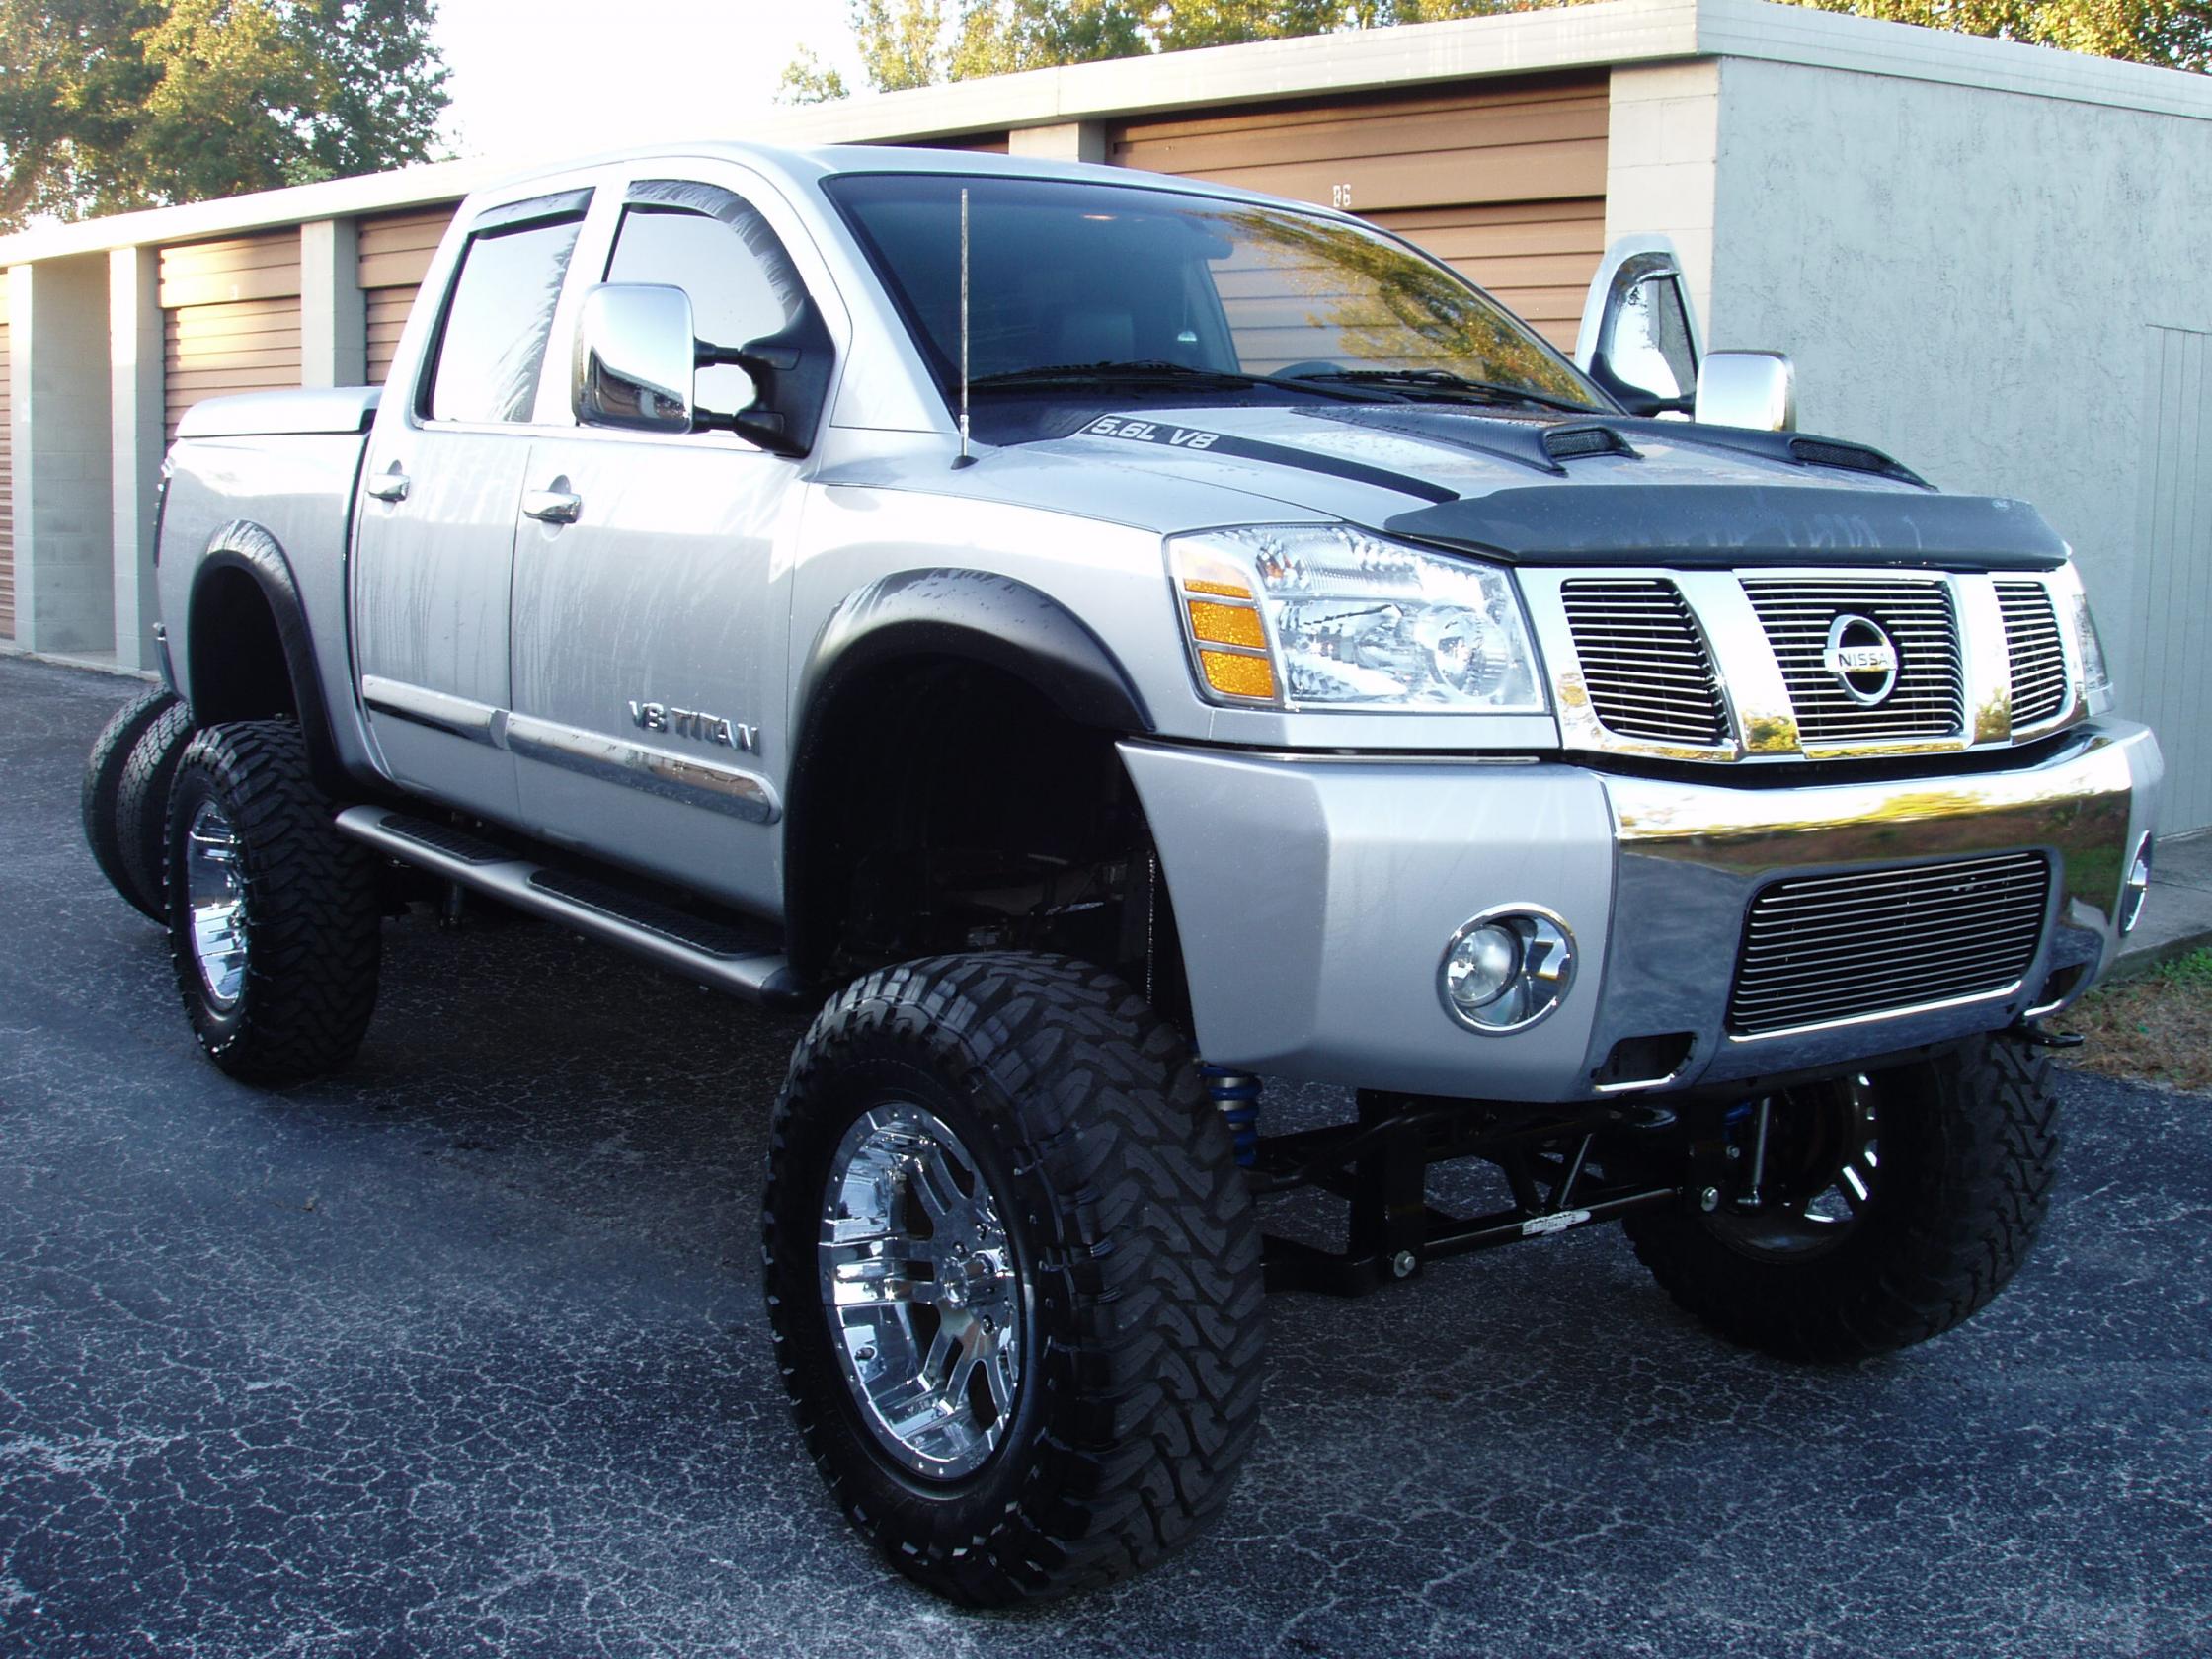 images of nissan titan le best photos and information of modification